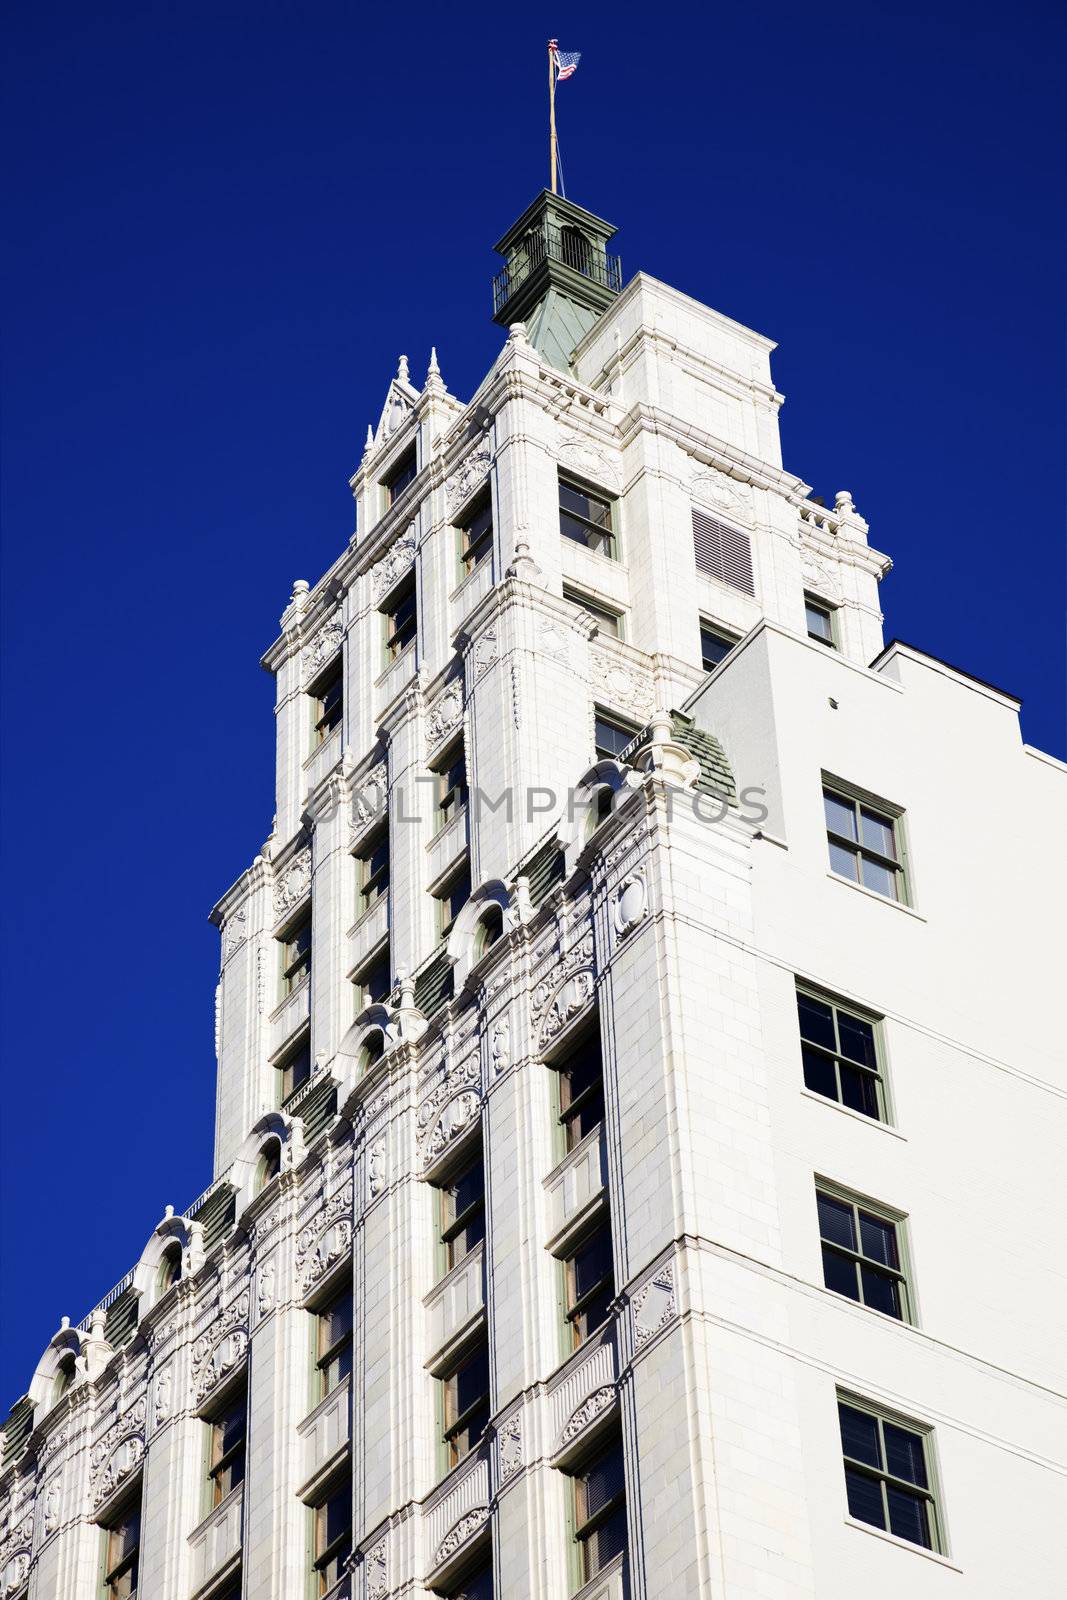 White Building against Blue Sky - seen in downtown Memphis, Tennessee, USA.